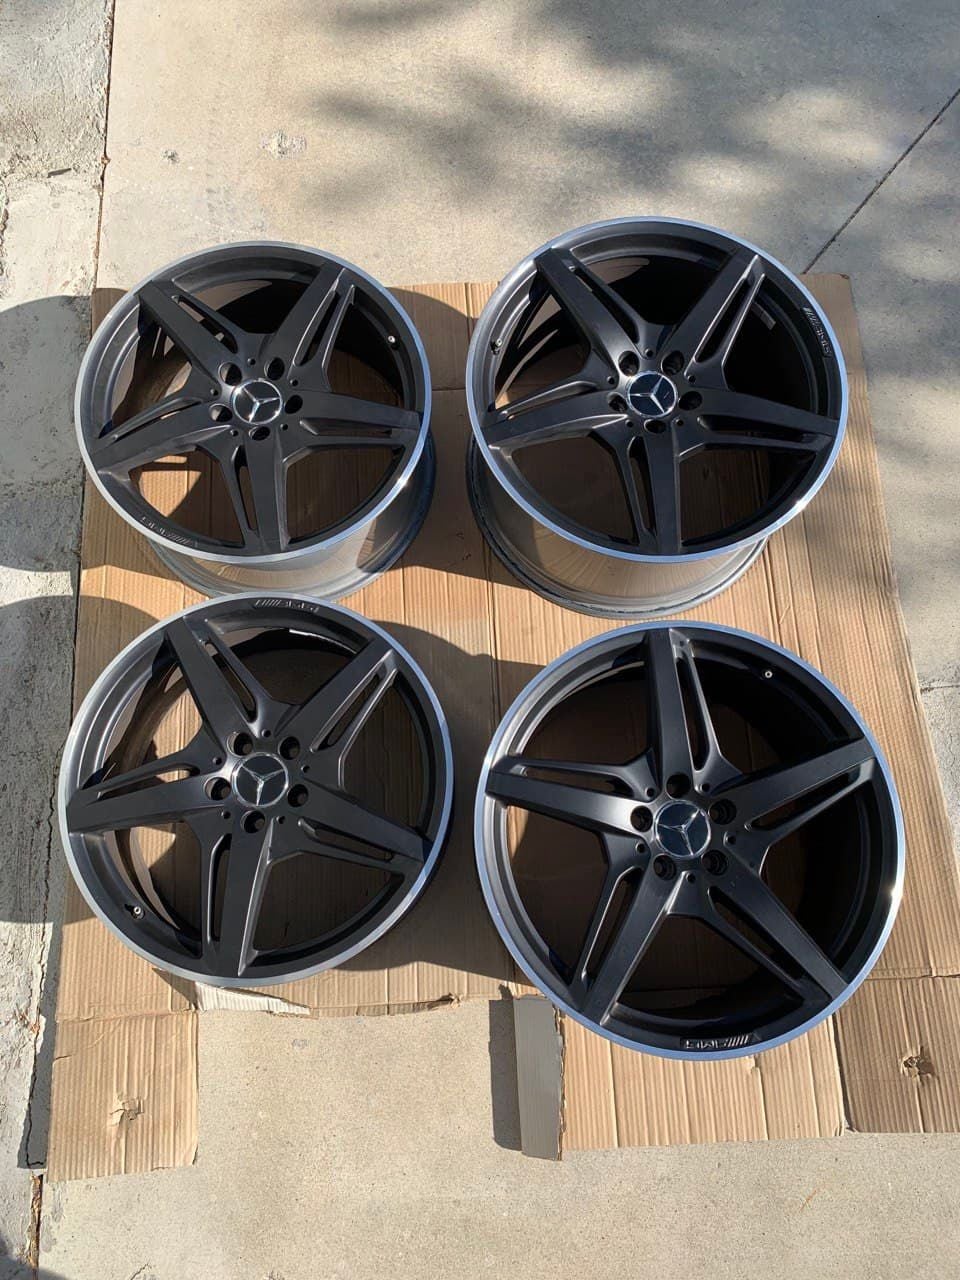 Wheels and Tires/Axles - 19"/20" Genuine Mercedes AMG GT 5-spoke Wheels W/ TPMS - Used - -1 to 0 Mercedes-Benz All Models - West Hills, CA 91307, United States